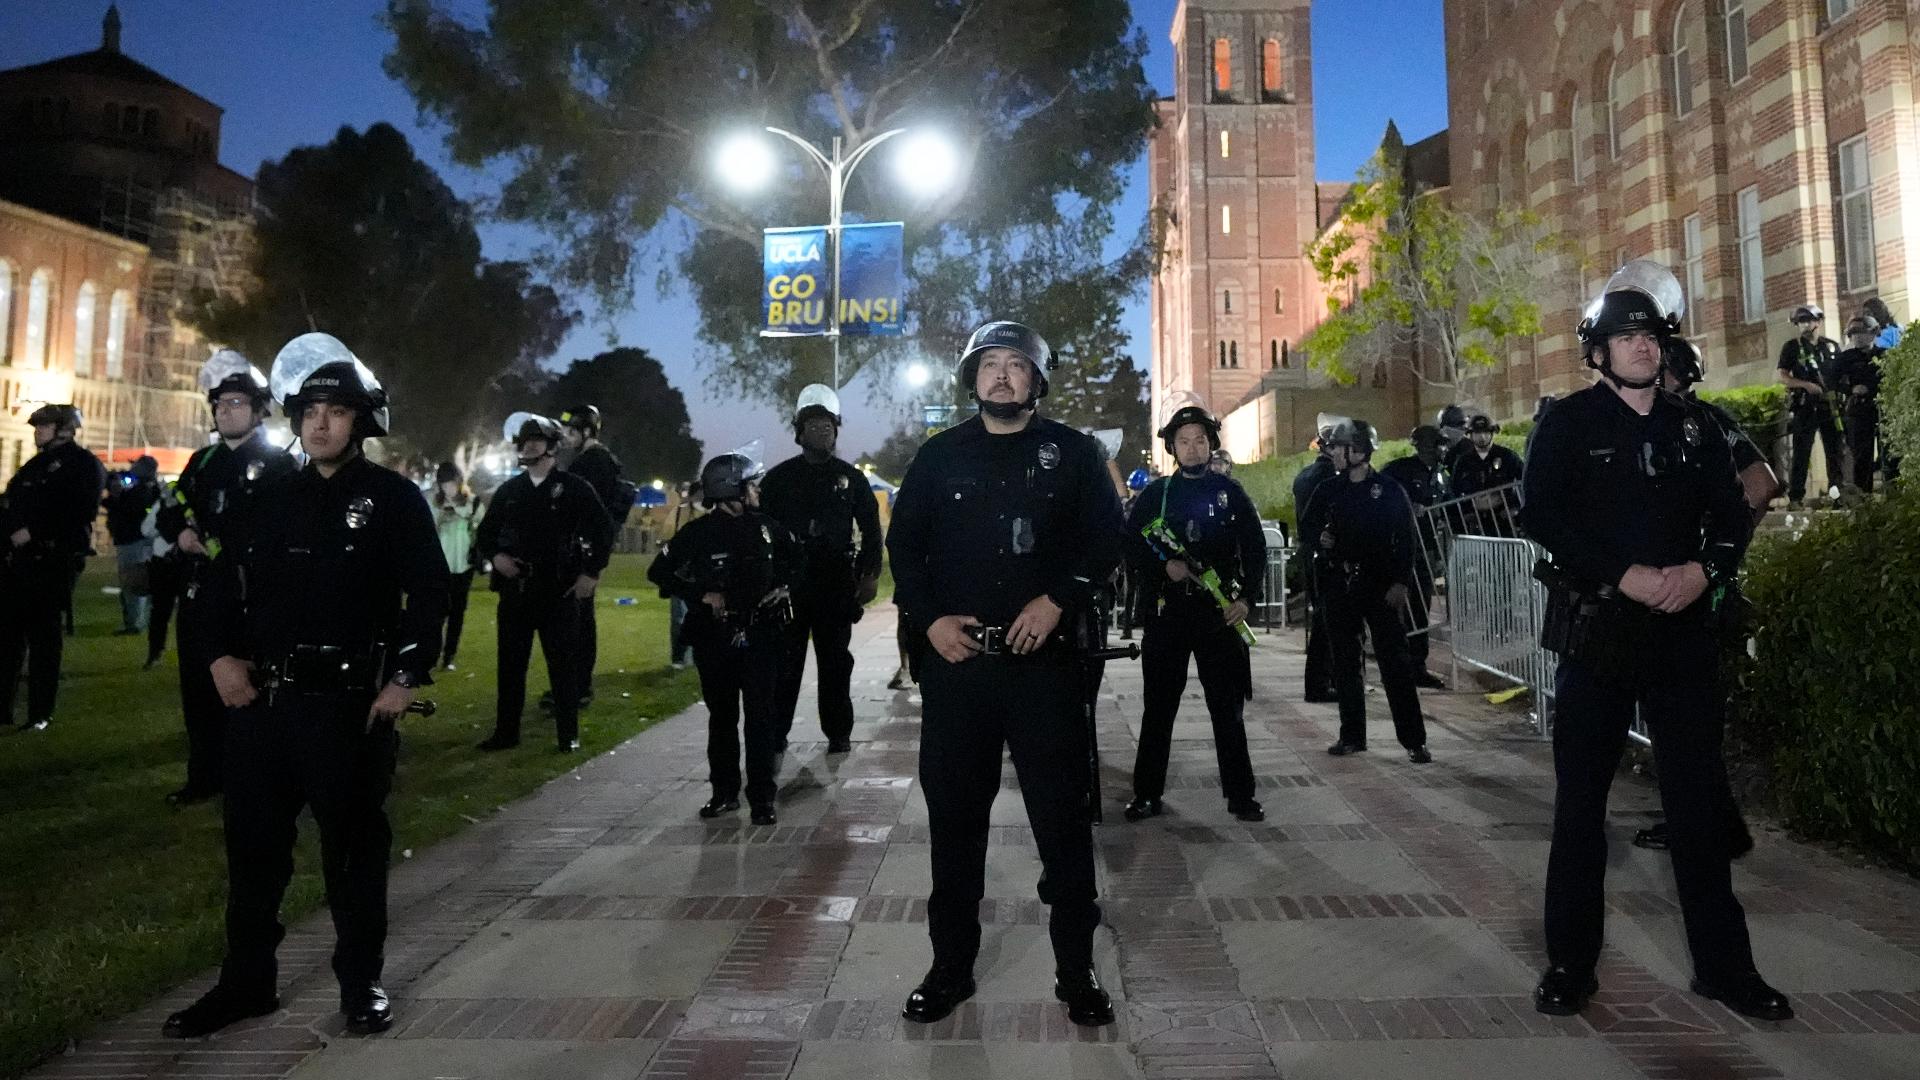 Police removed barricades and began dismantling a pro-Palestinian demonstrators’ encampment on the UCLA campus.